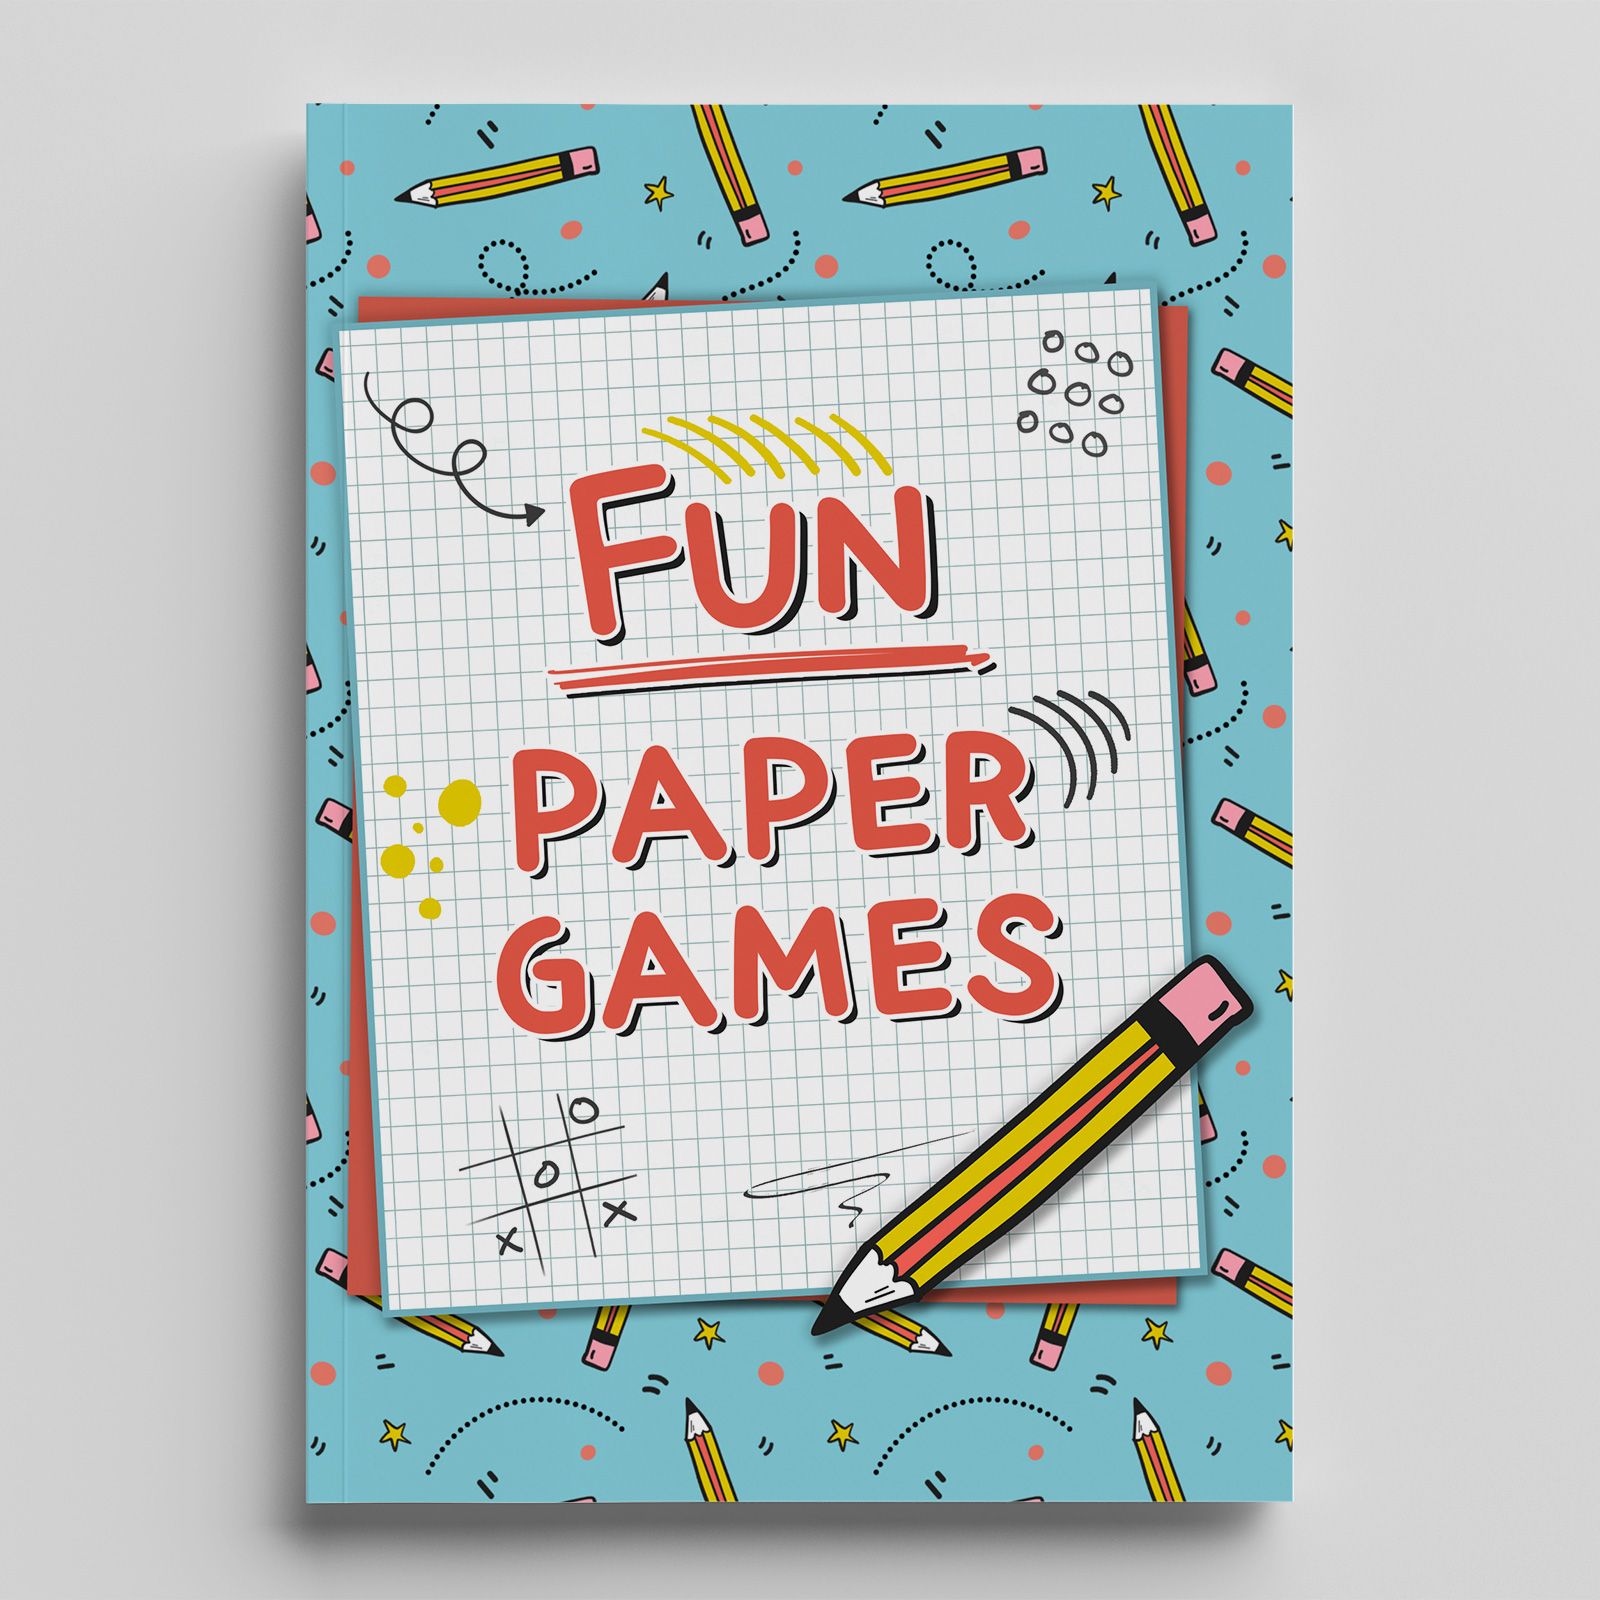 Pencil and Paper Games: Multiplayer Activity Book - Fun games to play while  you are traveling - Ultimate Activity Book For Kids and Adults - 8 Games